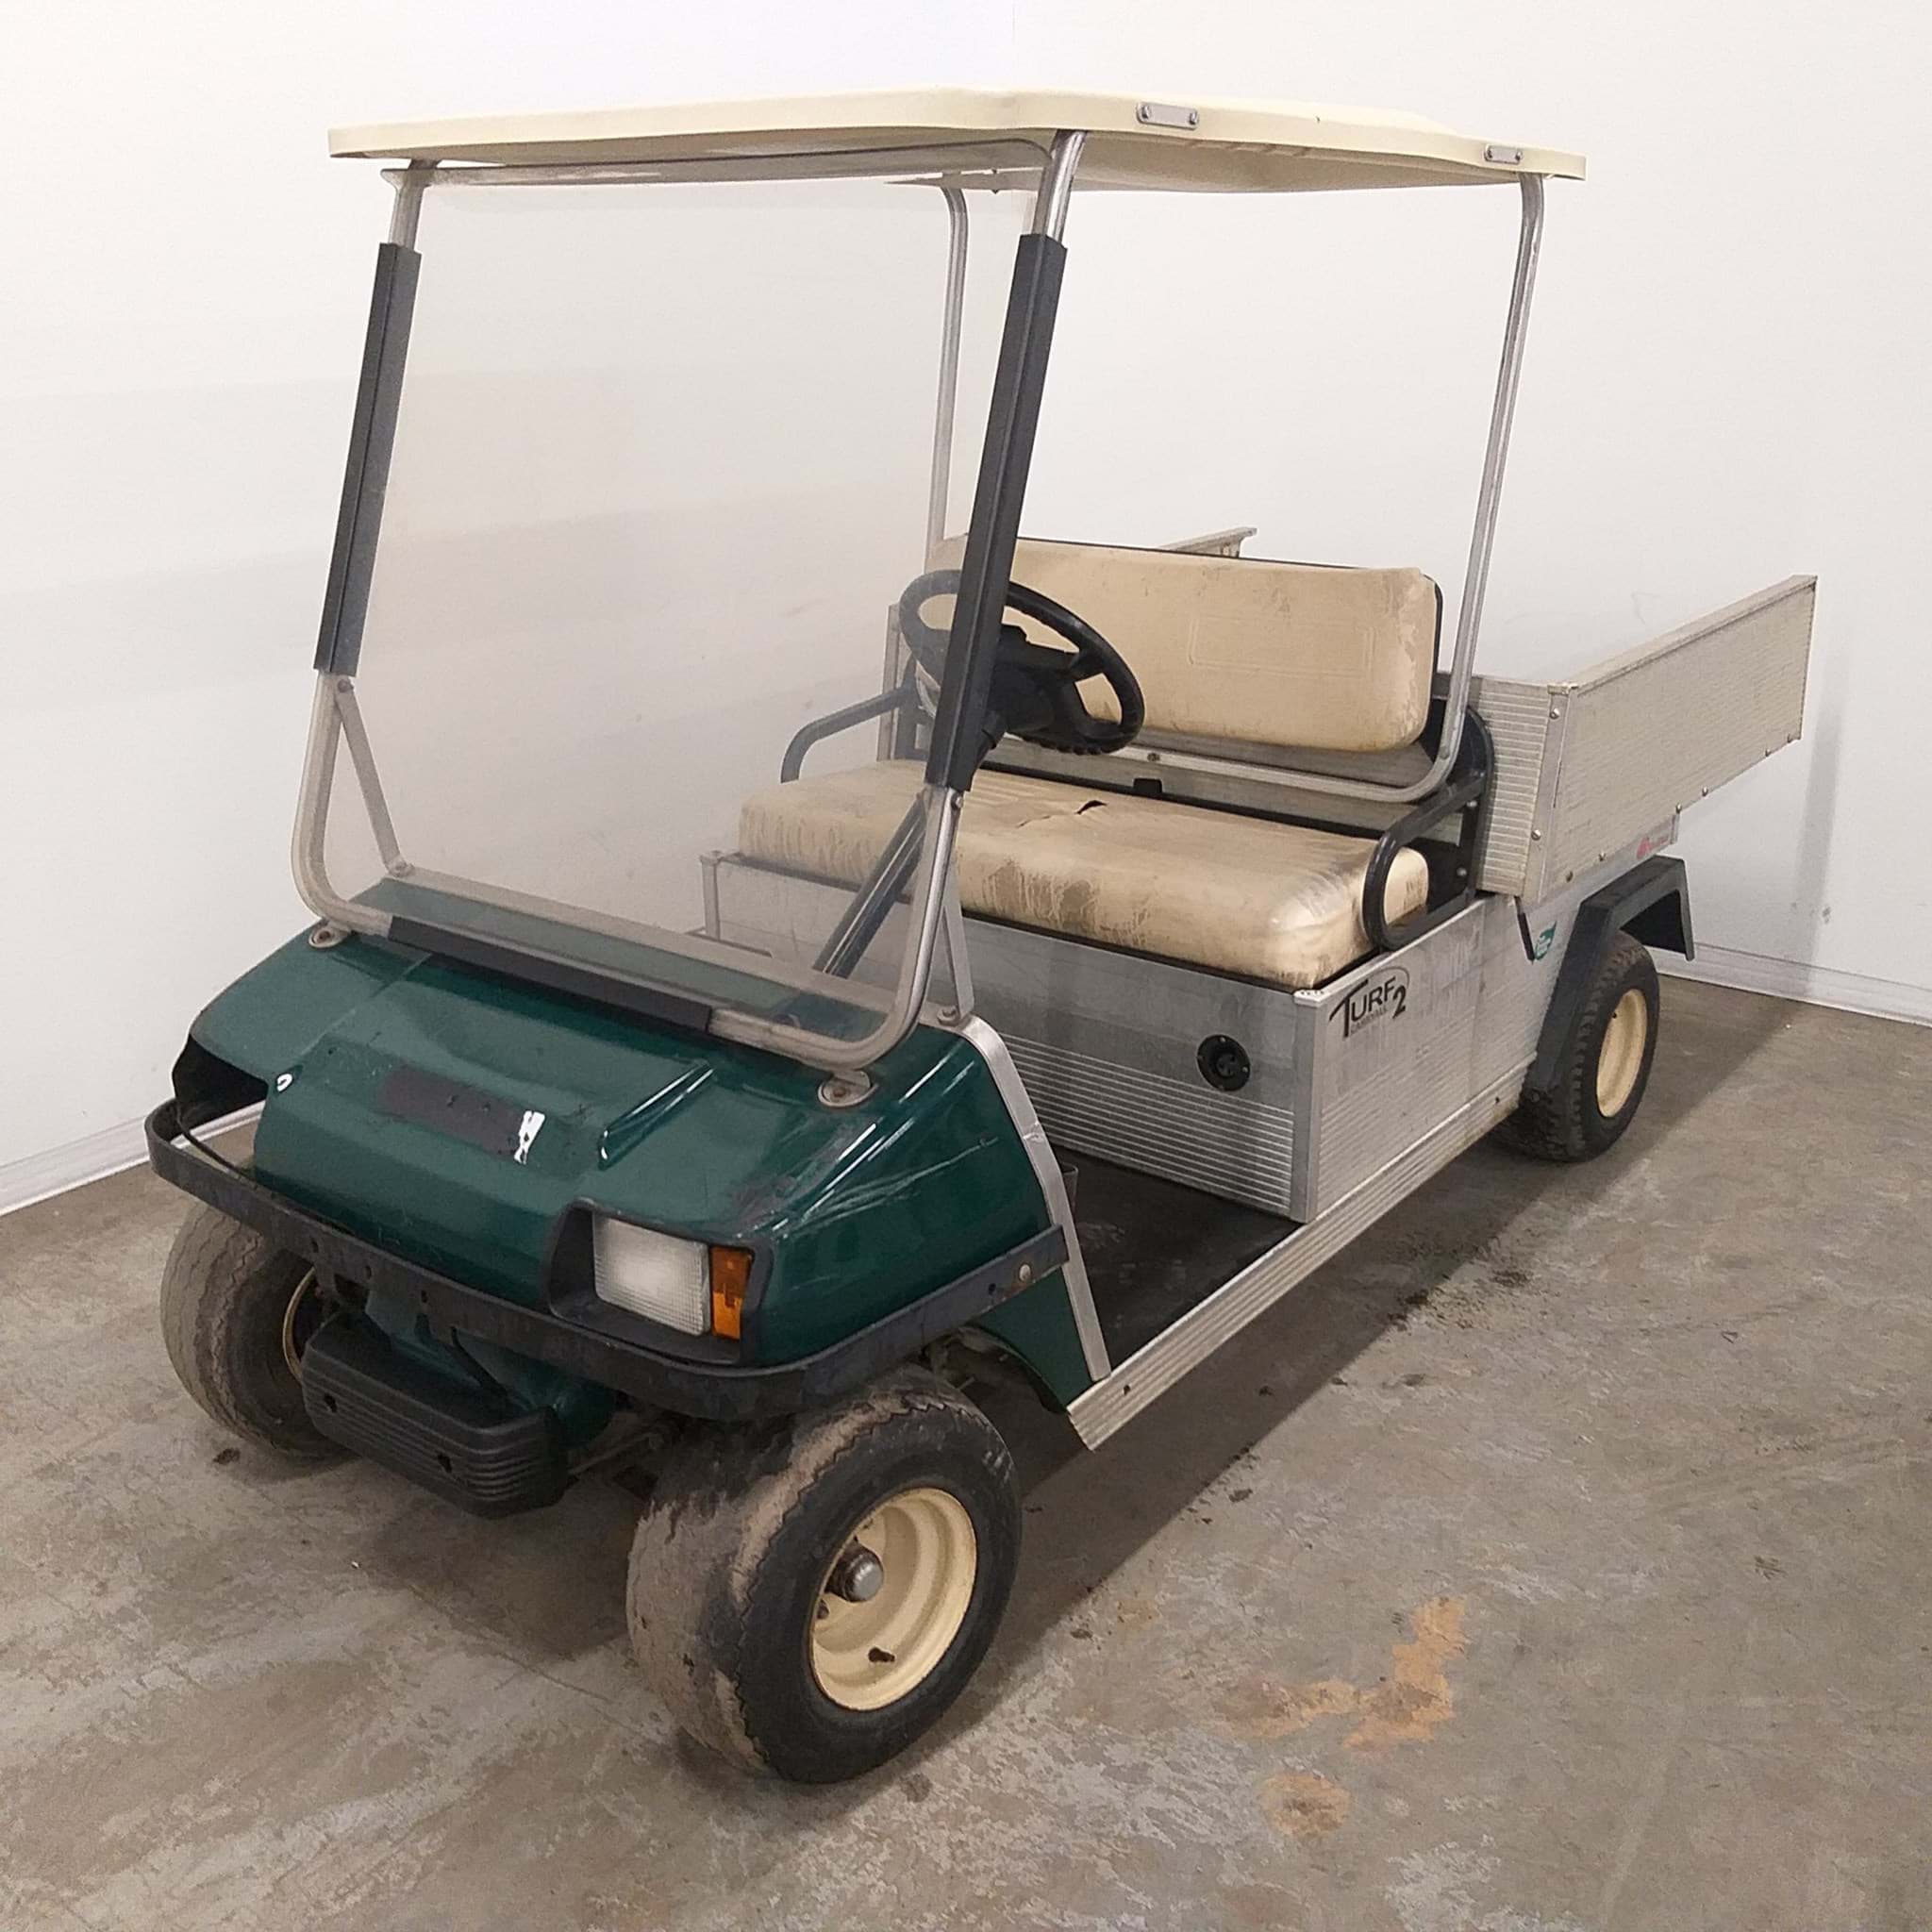 Used - 2010 - Electric - Club Car Carryall 2 - Green | Carrus - Parts for  your carts